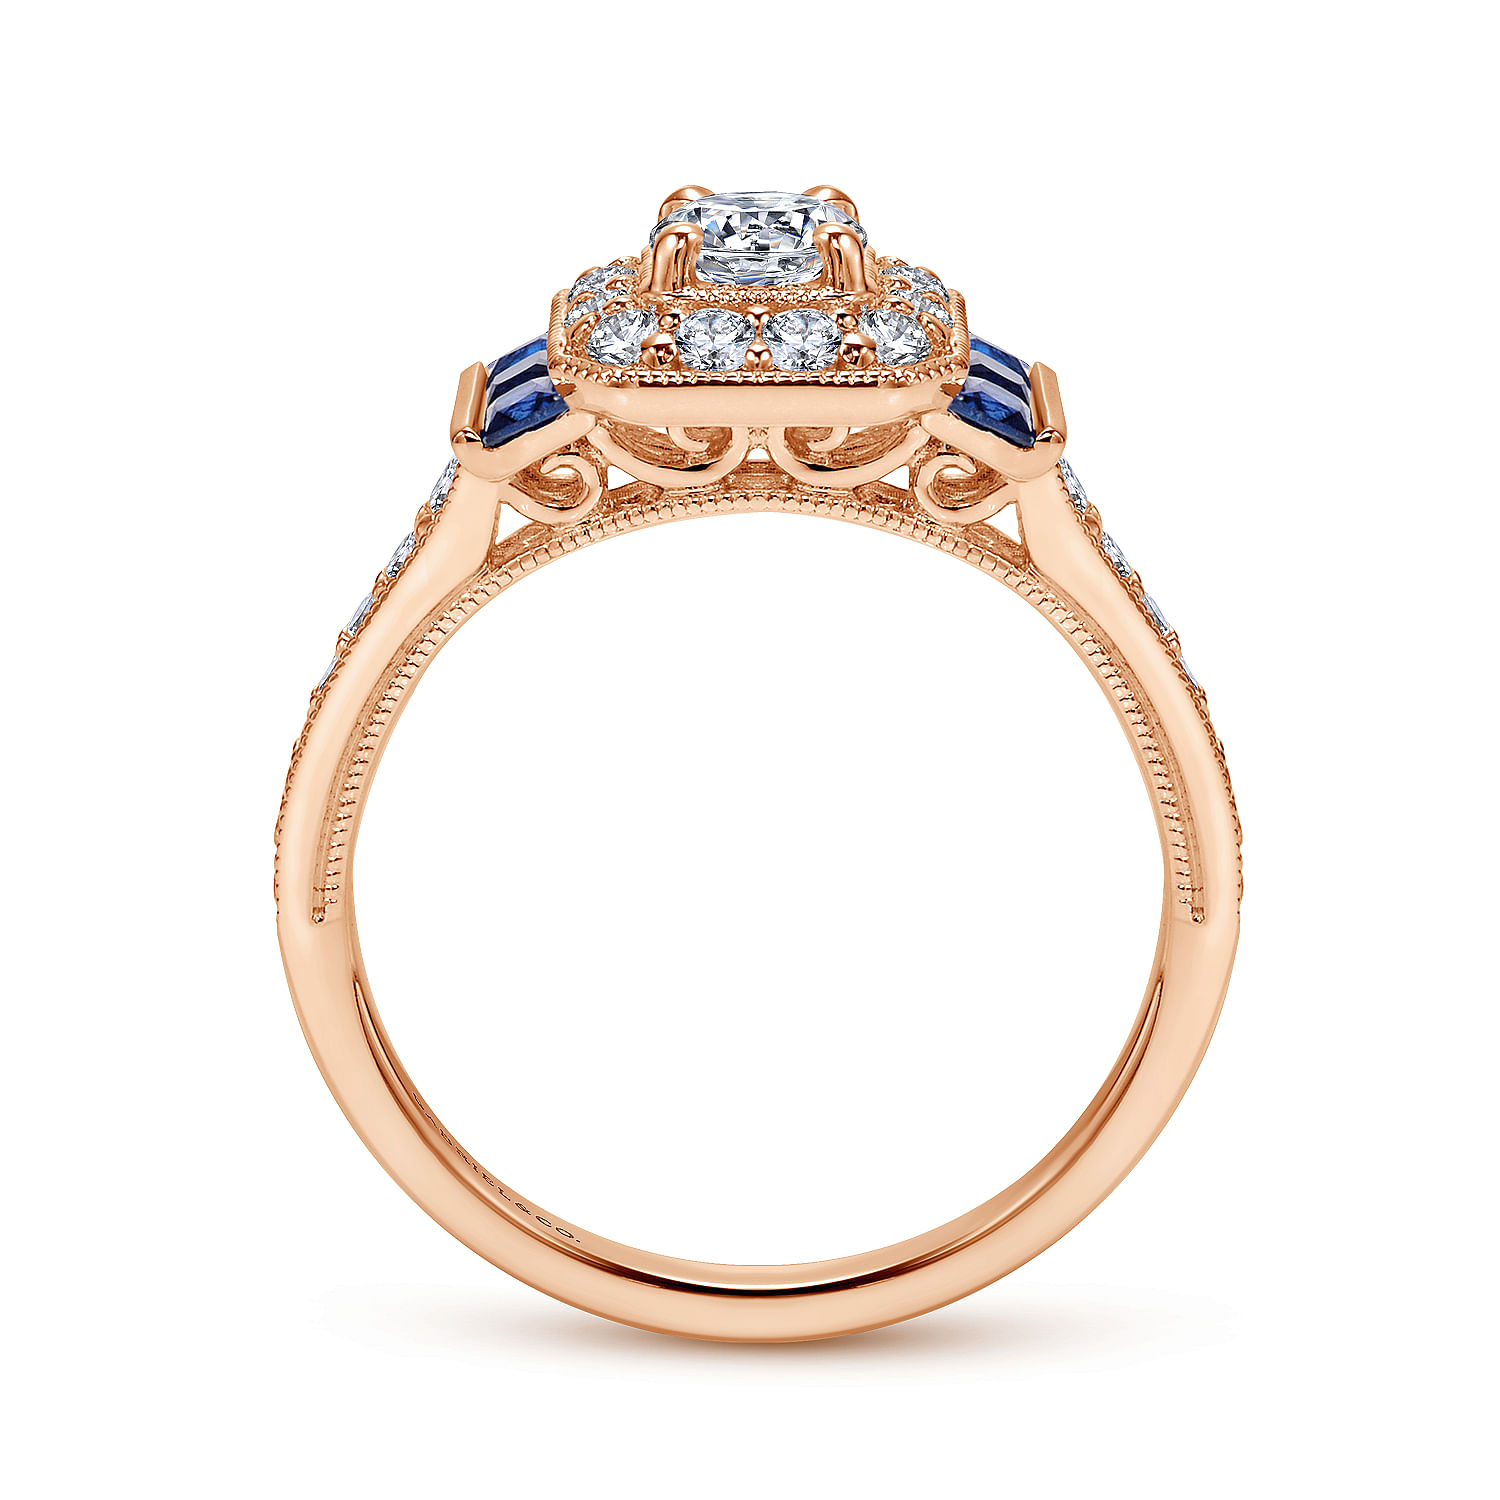 Vintage Inspired 14K Rose Gold Round Halo Diamond and Sapphire Engagement Ring